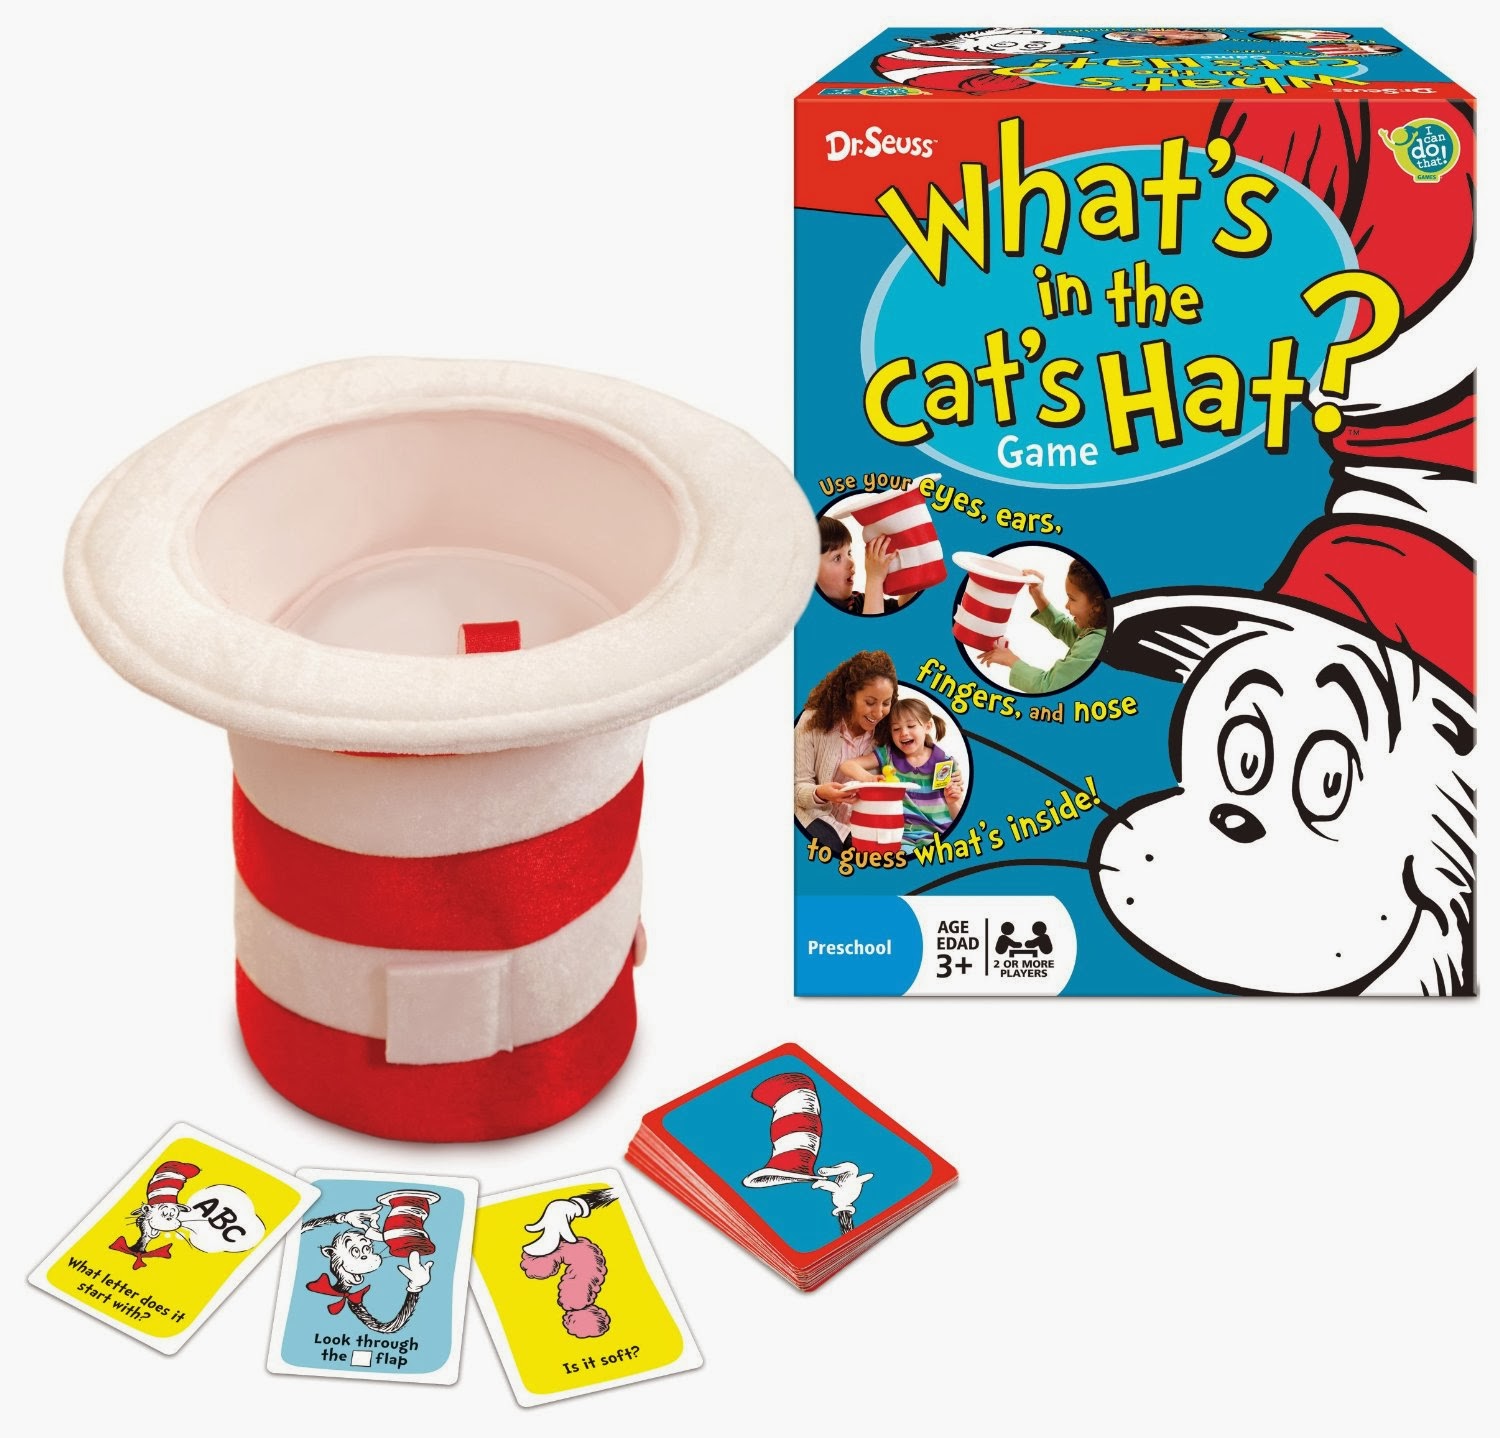  cat in the hat game